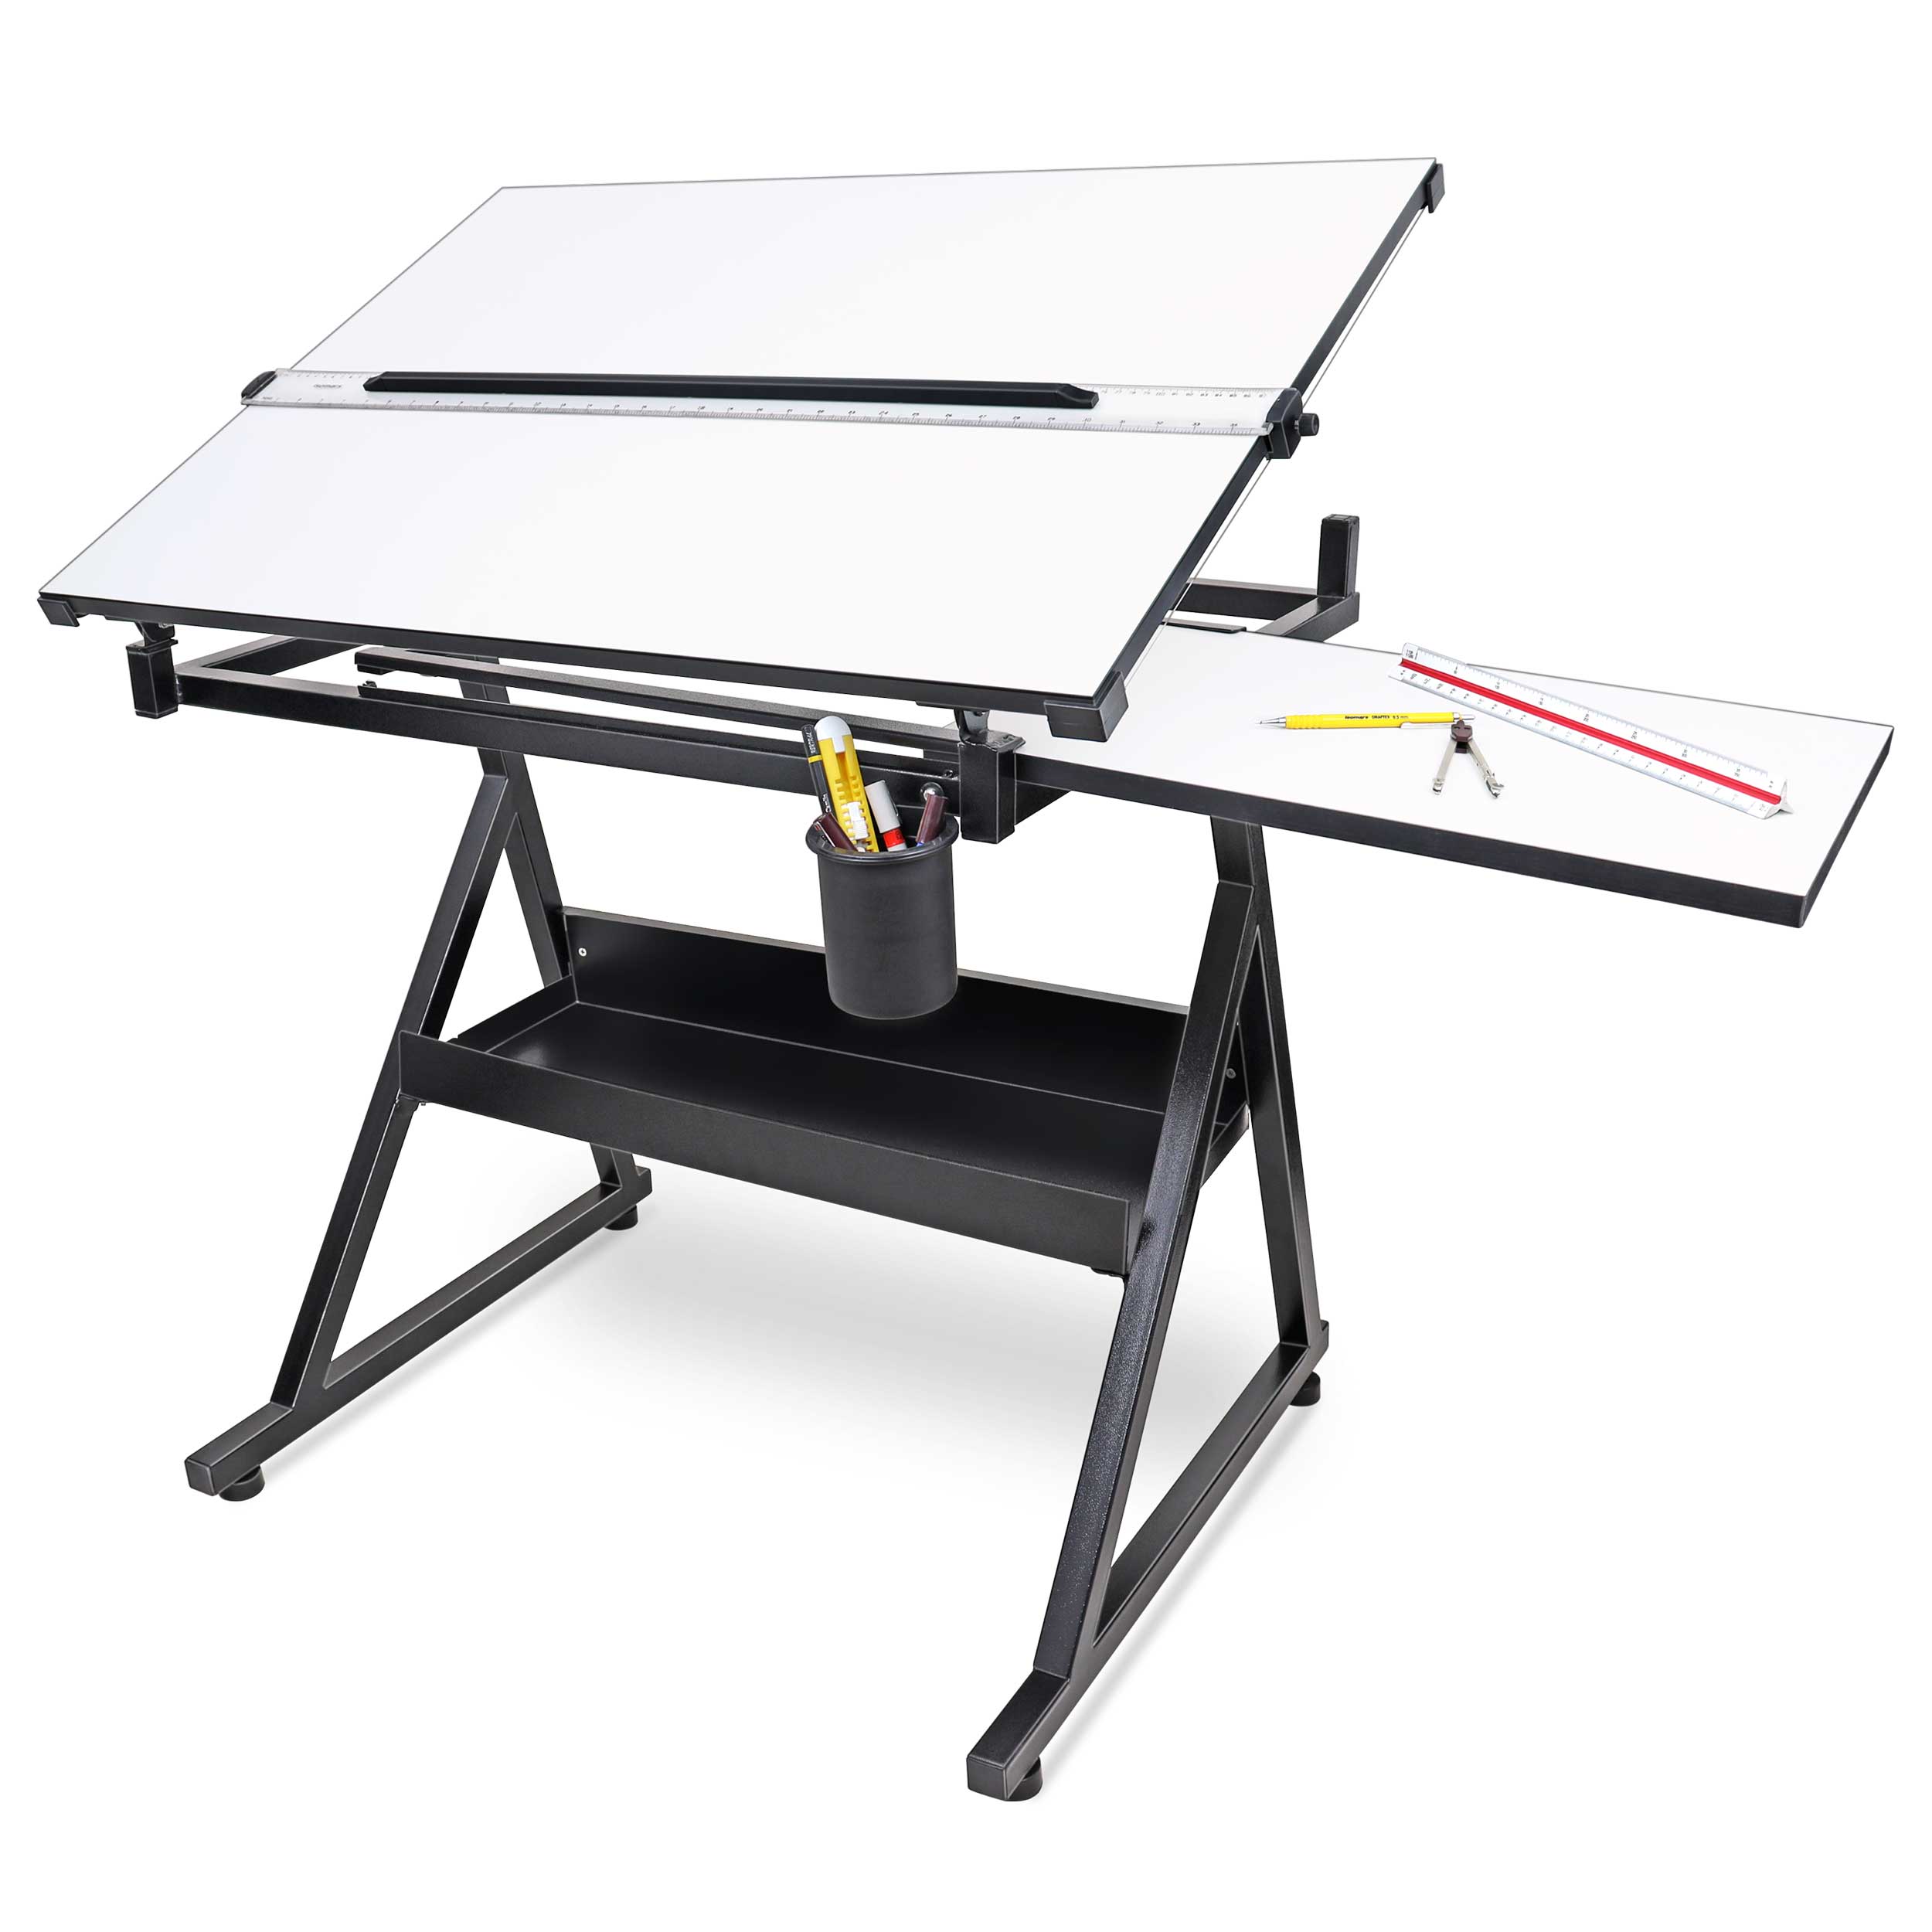 A1 Spectrum Deluxe Drawing Board – Counter Weight - Nobis Education  Furniture